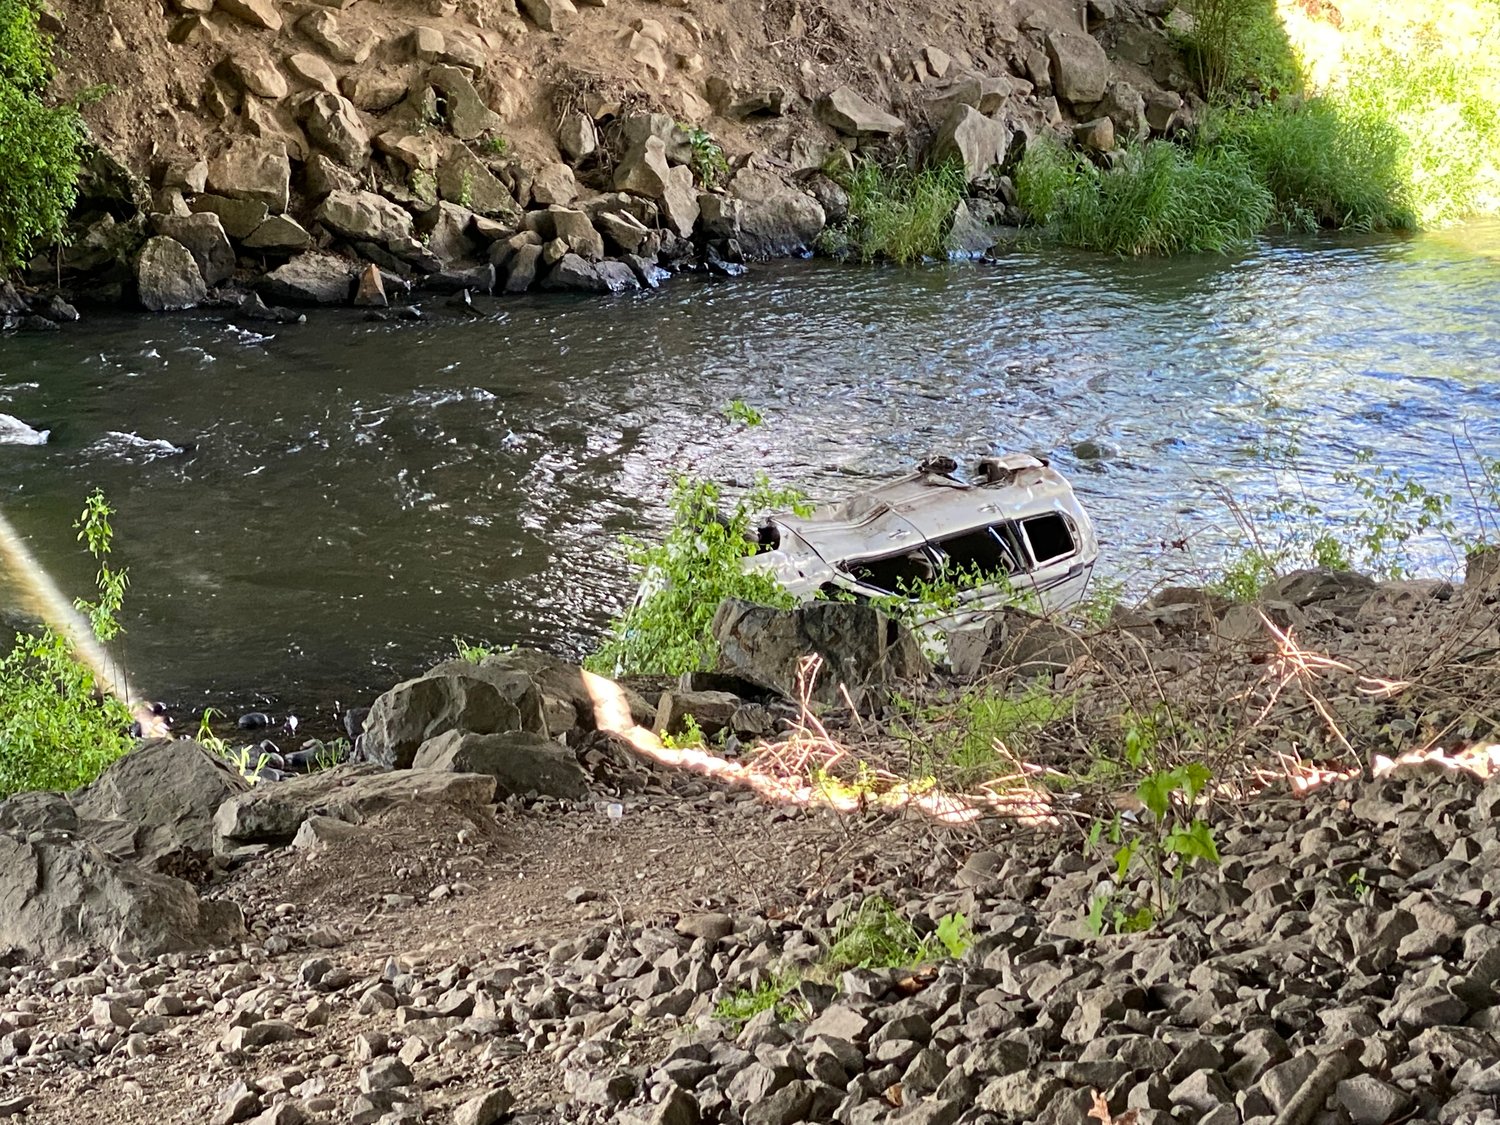 An SUV carrying 10 teenagers from Prairie High School spun off the road and rolled multiple times near 117th Street in Salmon Creek on May 19.